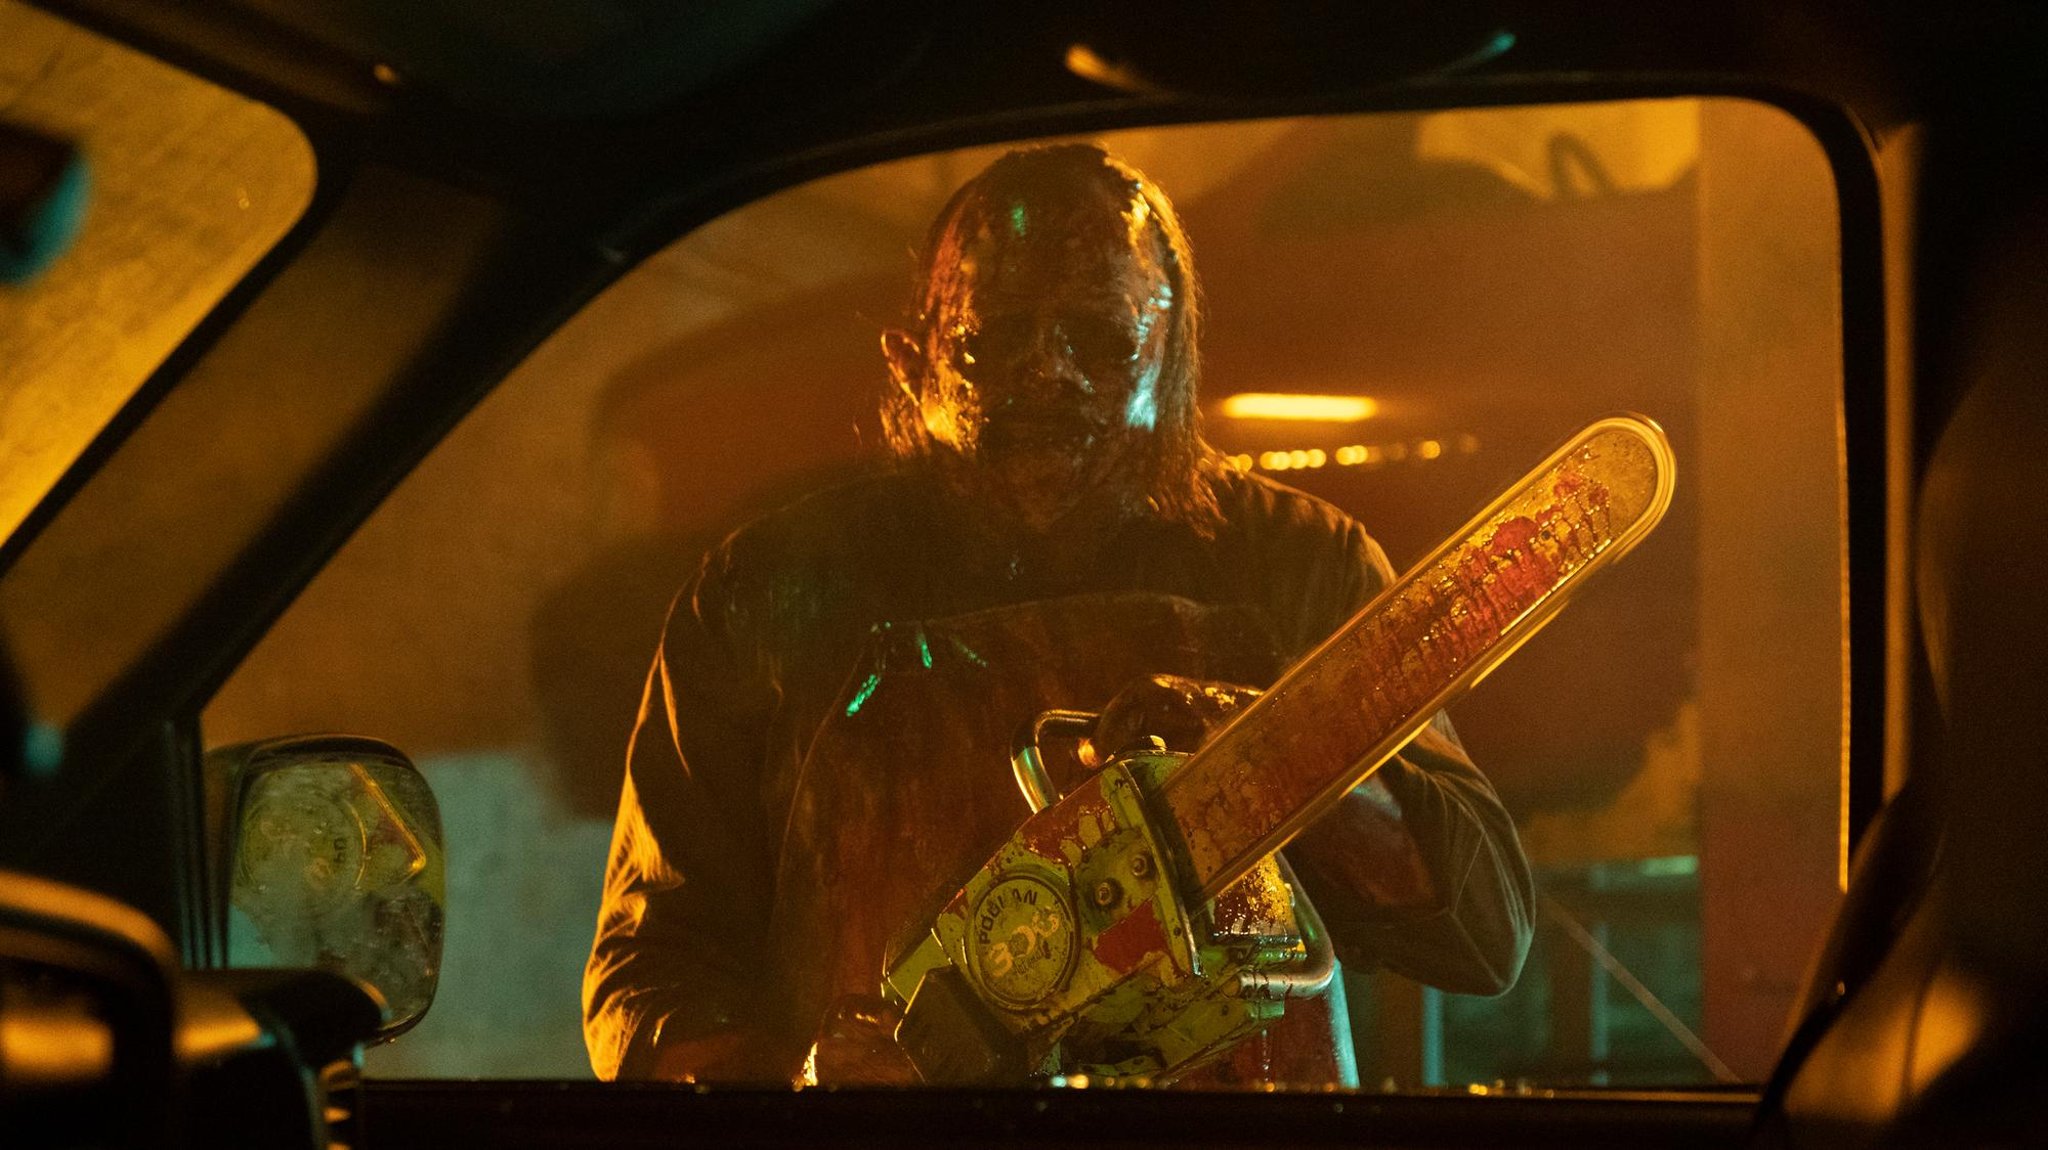 Texas Chainsaw Massacre 2022 is terrible worthless requel from David Blue Garcia, devoid of the substance of 1974 Tobe Hooper The Texas Chain Saw Massacre